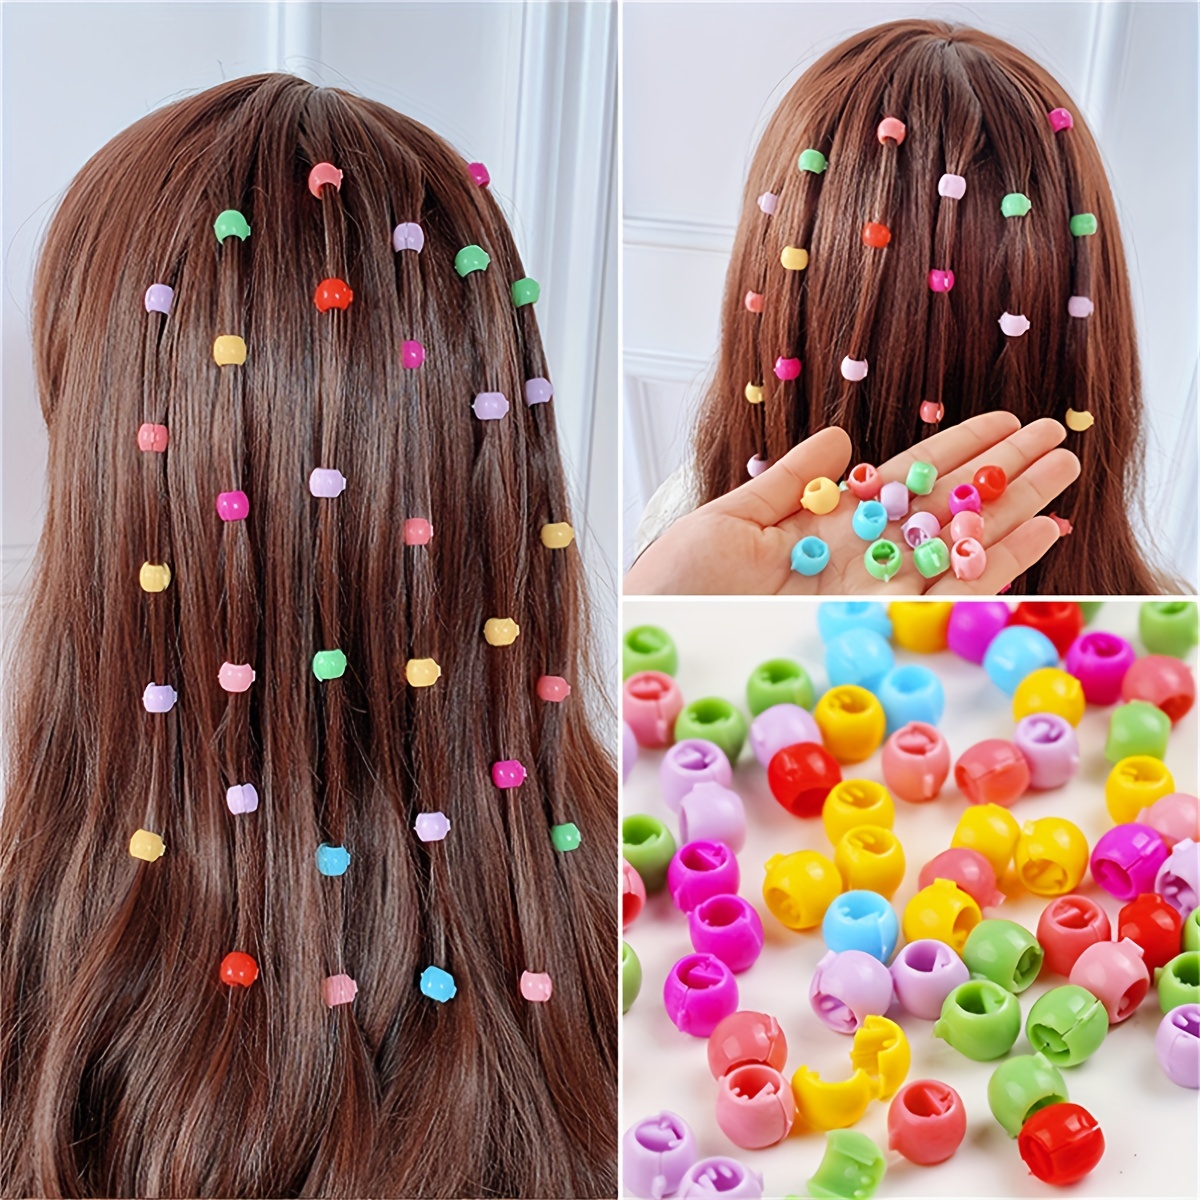 406pcs Hair Beads Set for Braids for Girls and Women Including 200pcs Clear  Hair Beads for Braids for Kids,200pcs Elastic Rubber Bands,5pcs Quick